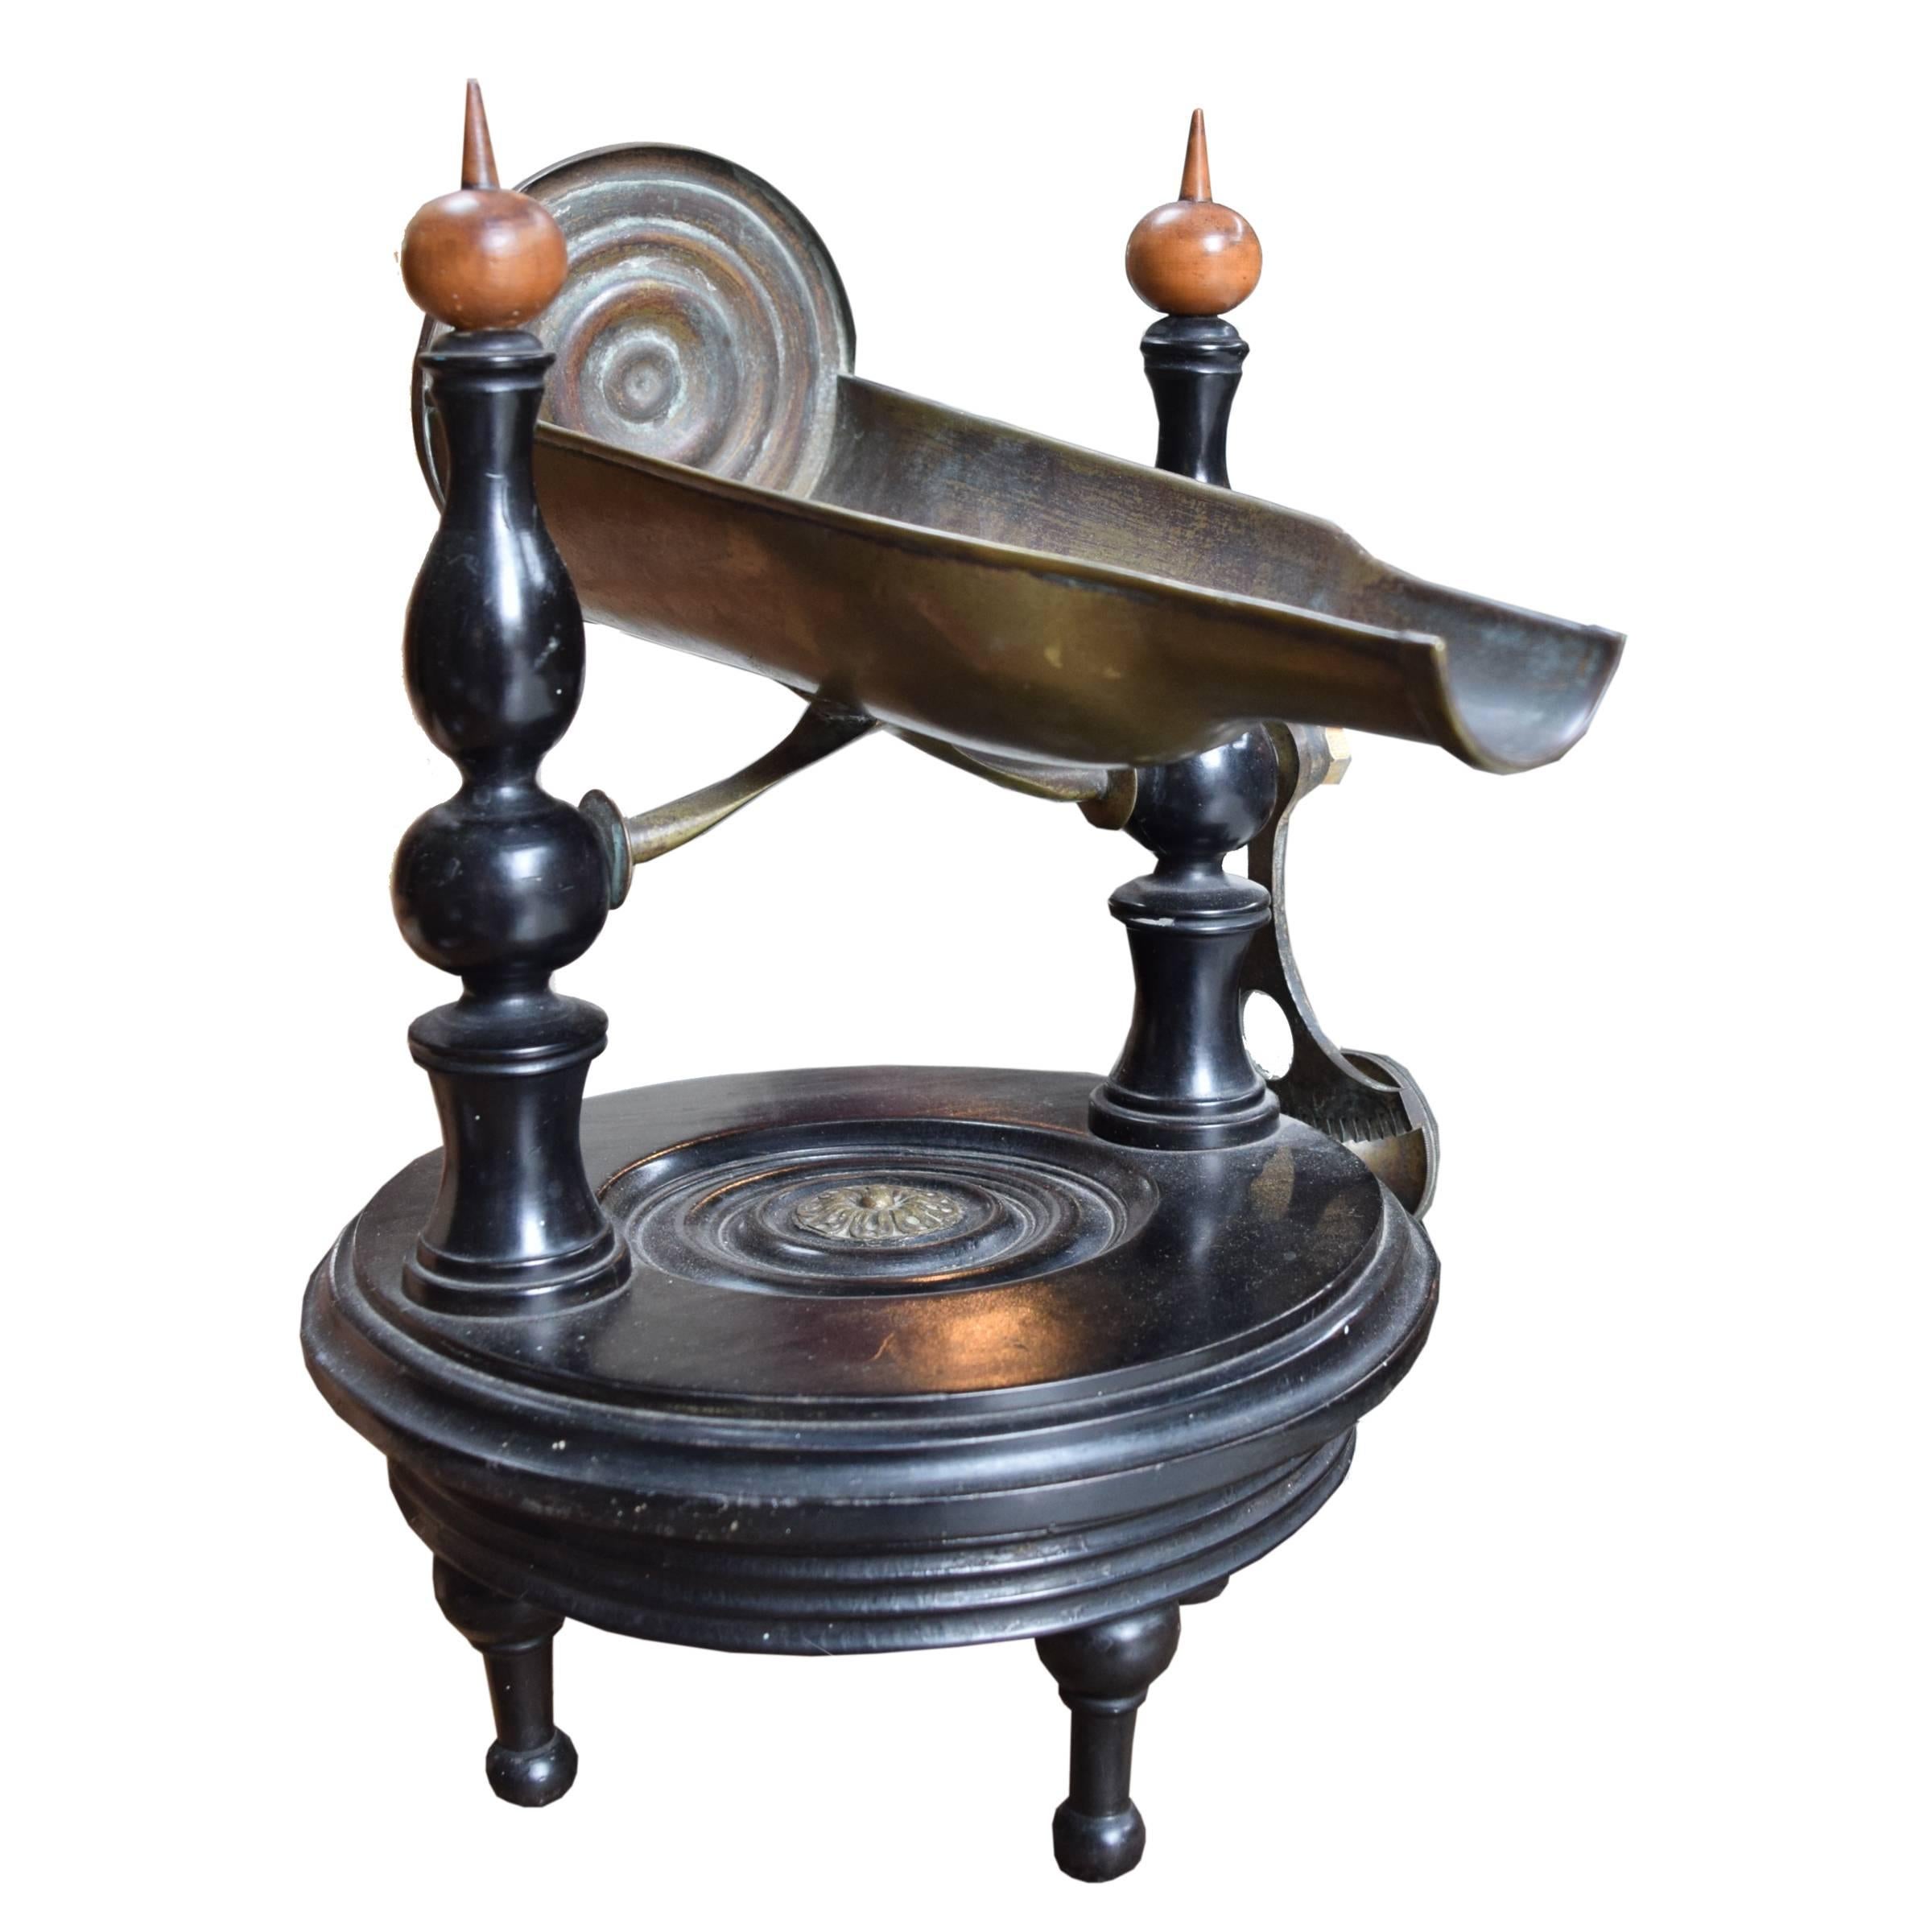 A lovely Italian mechanical wine server with a brass bottle cradle and wood base with spindled supports, and raised on three turned legs. Turning the knob activates the cradle, tilting it to achieve the perfect angle for pouring, late 19th century.